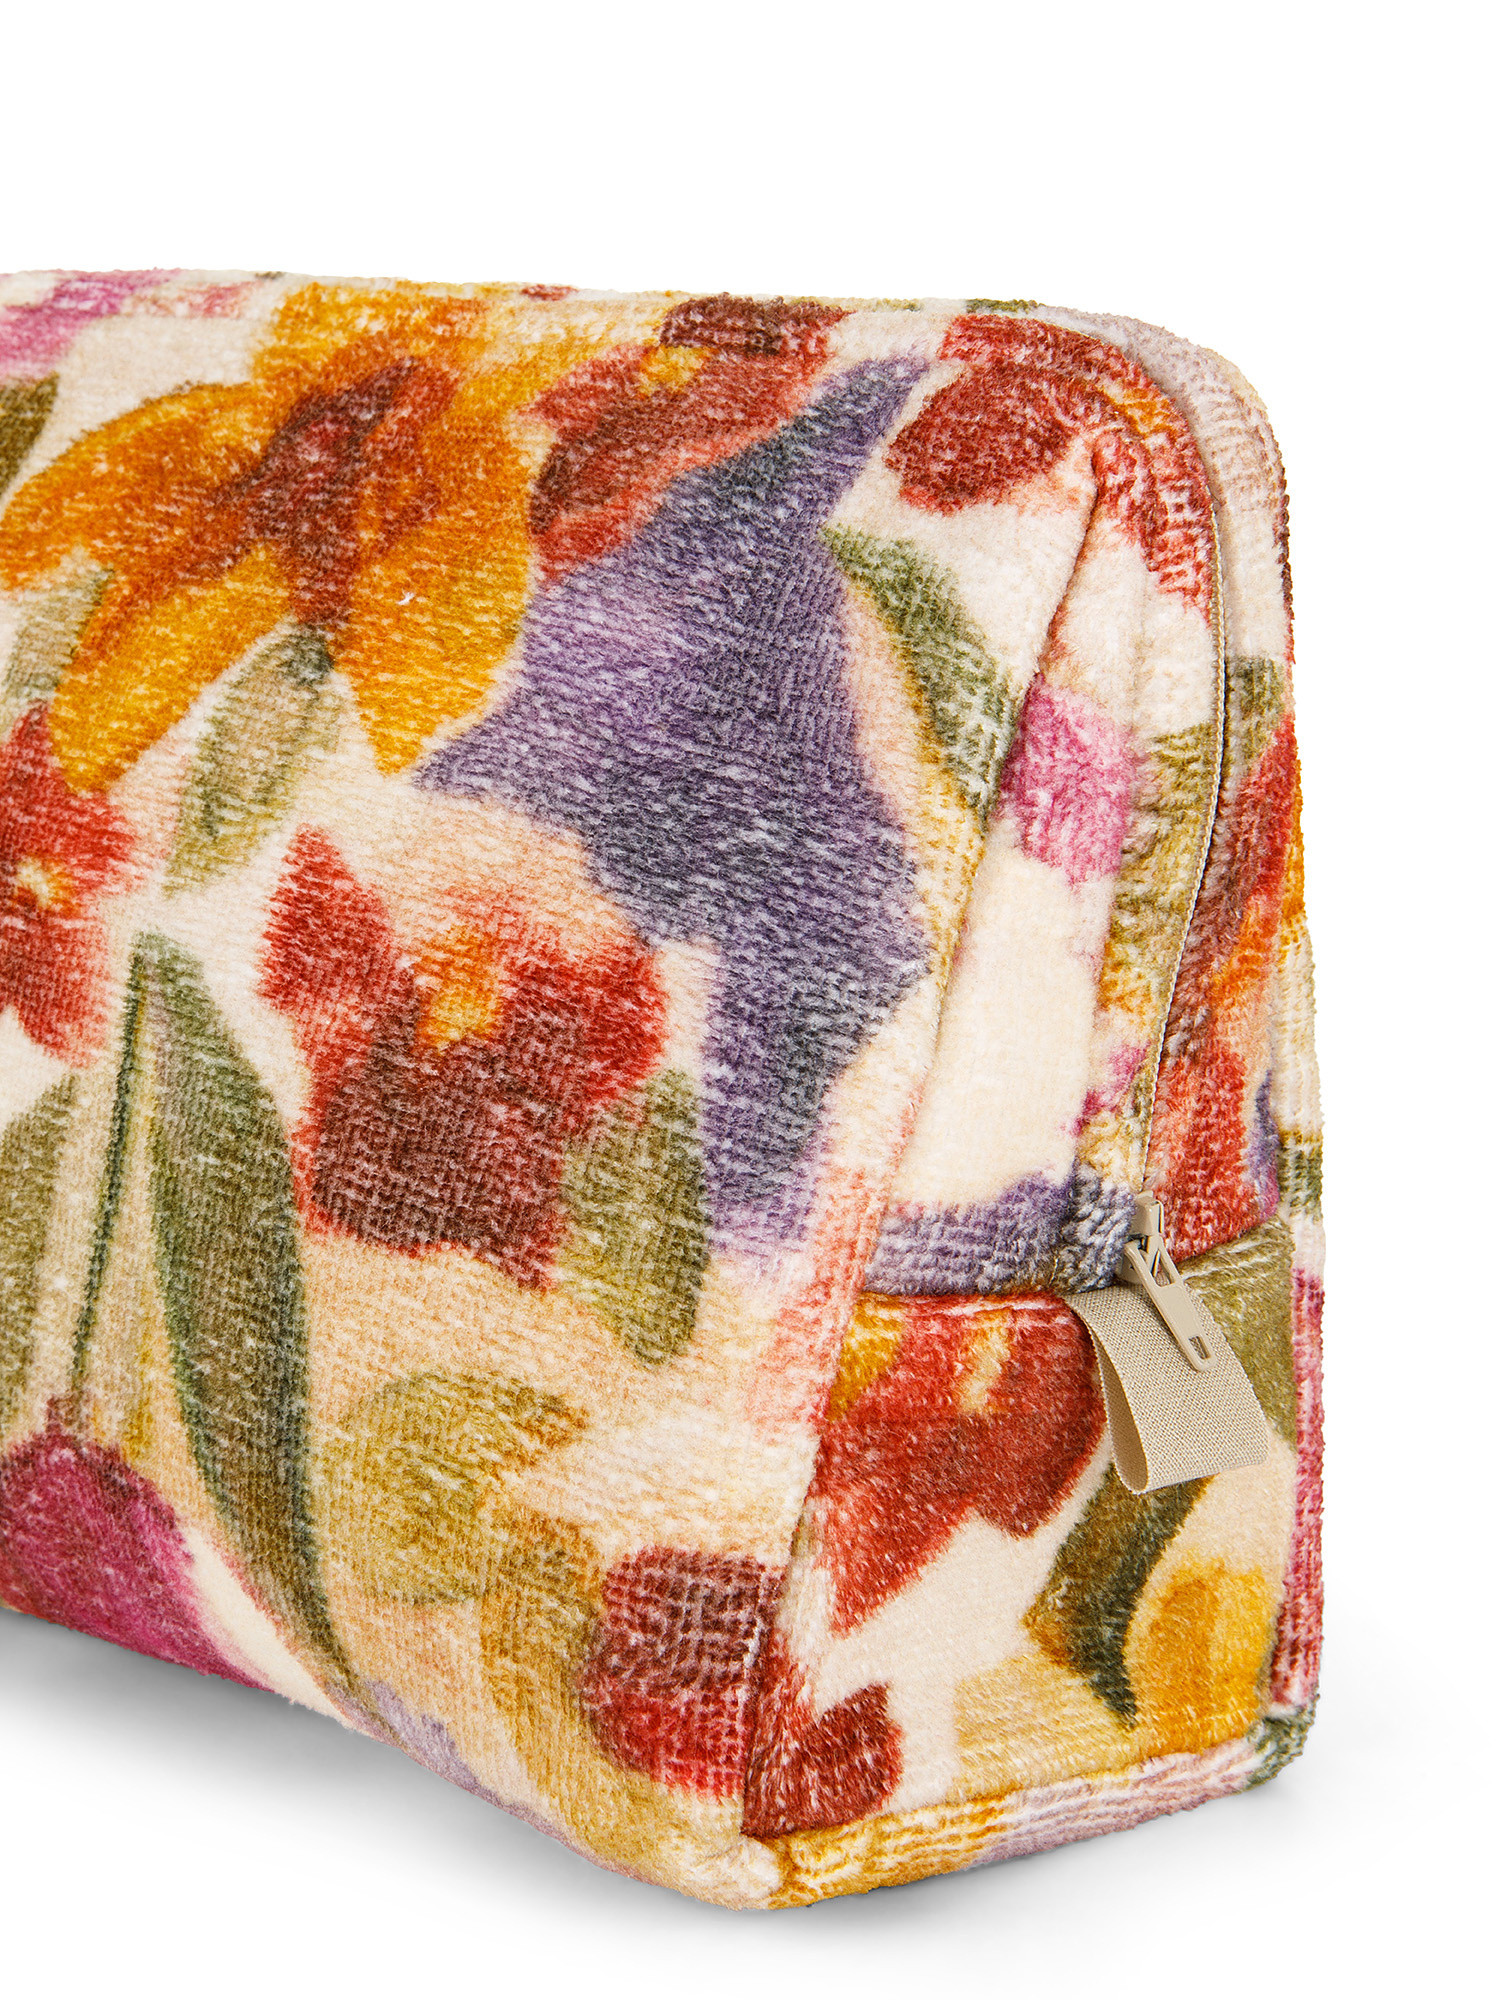 Beautycase cotone velour stampa floreale, Multicolor, large image number 1